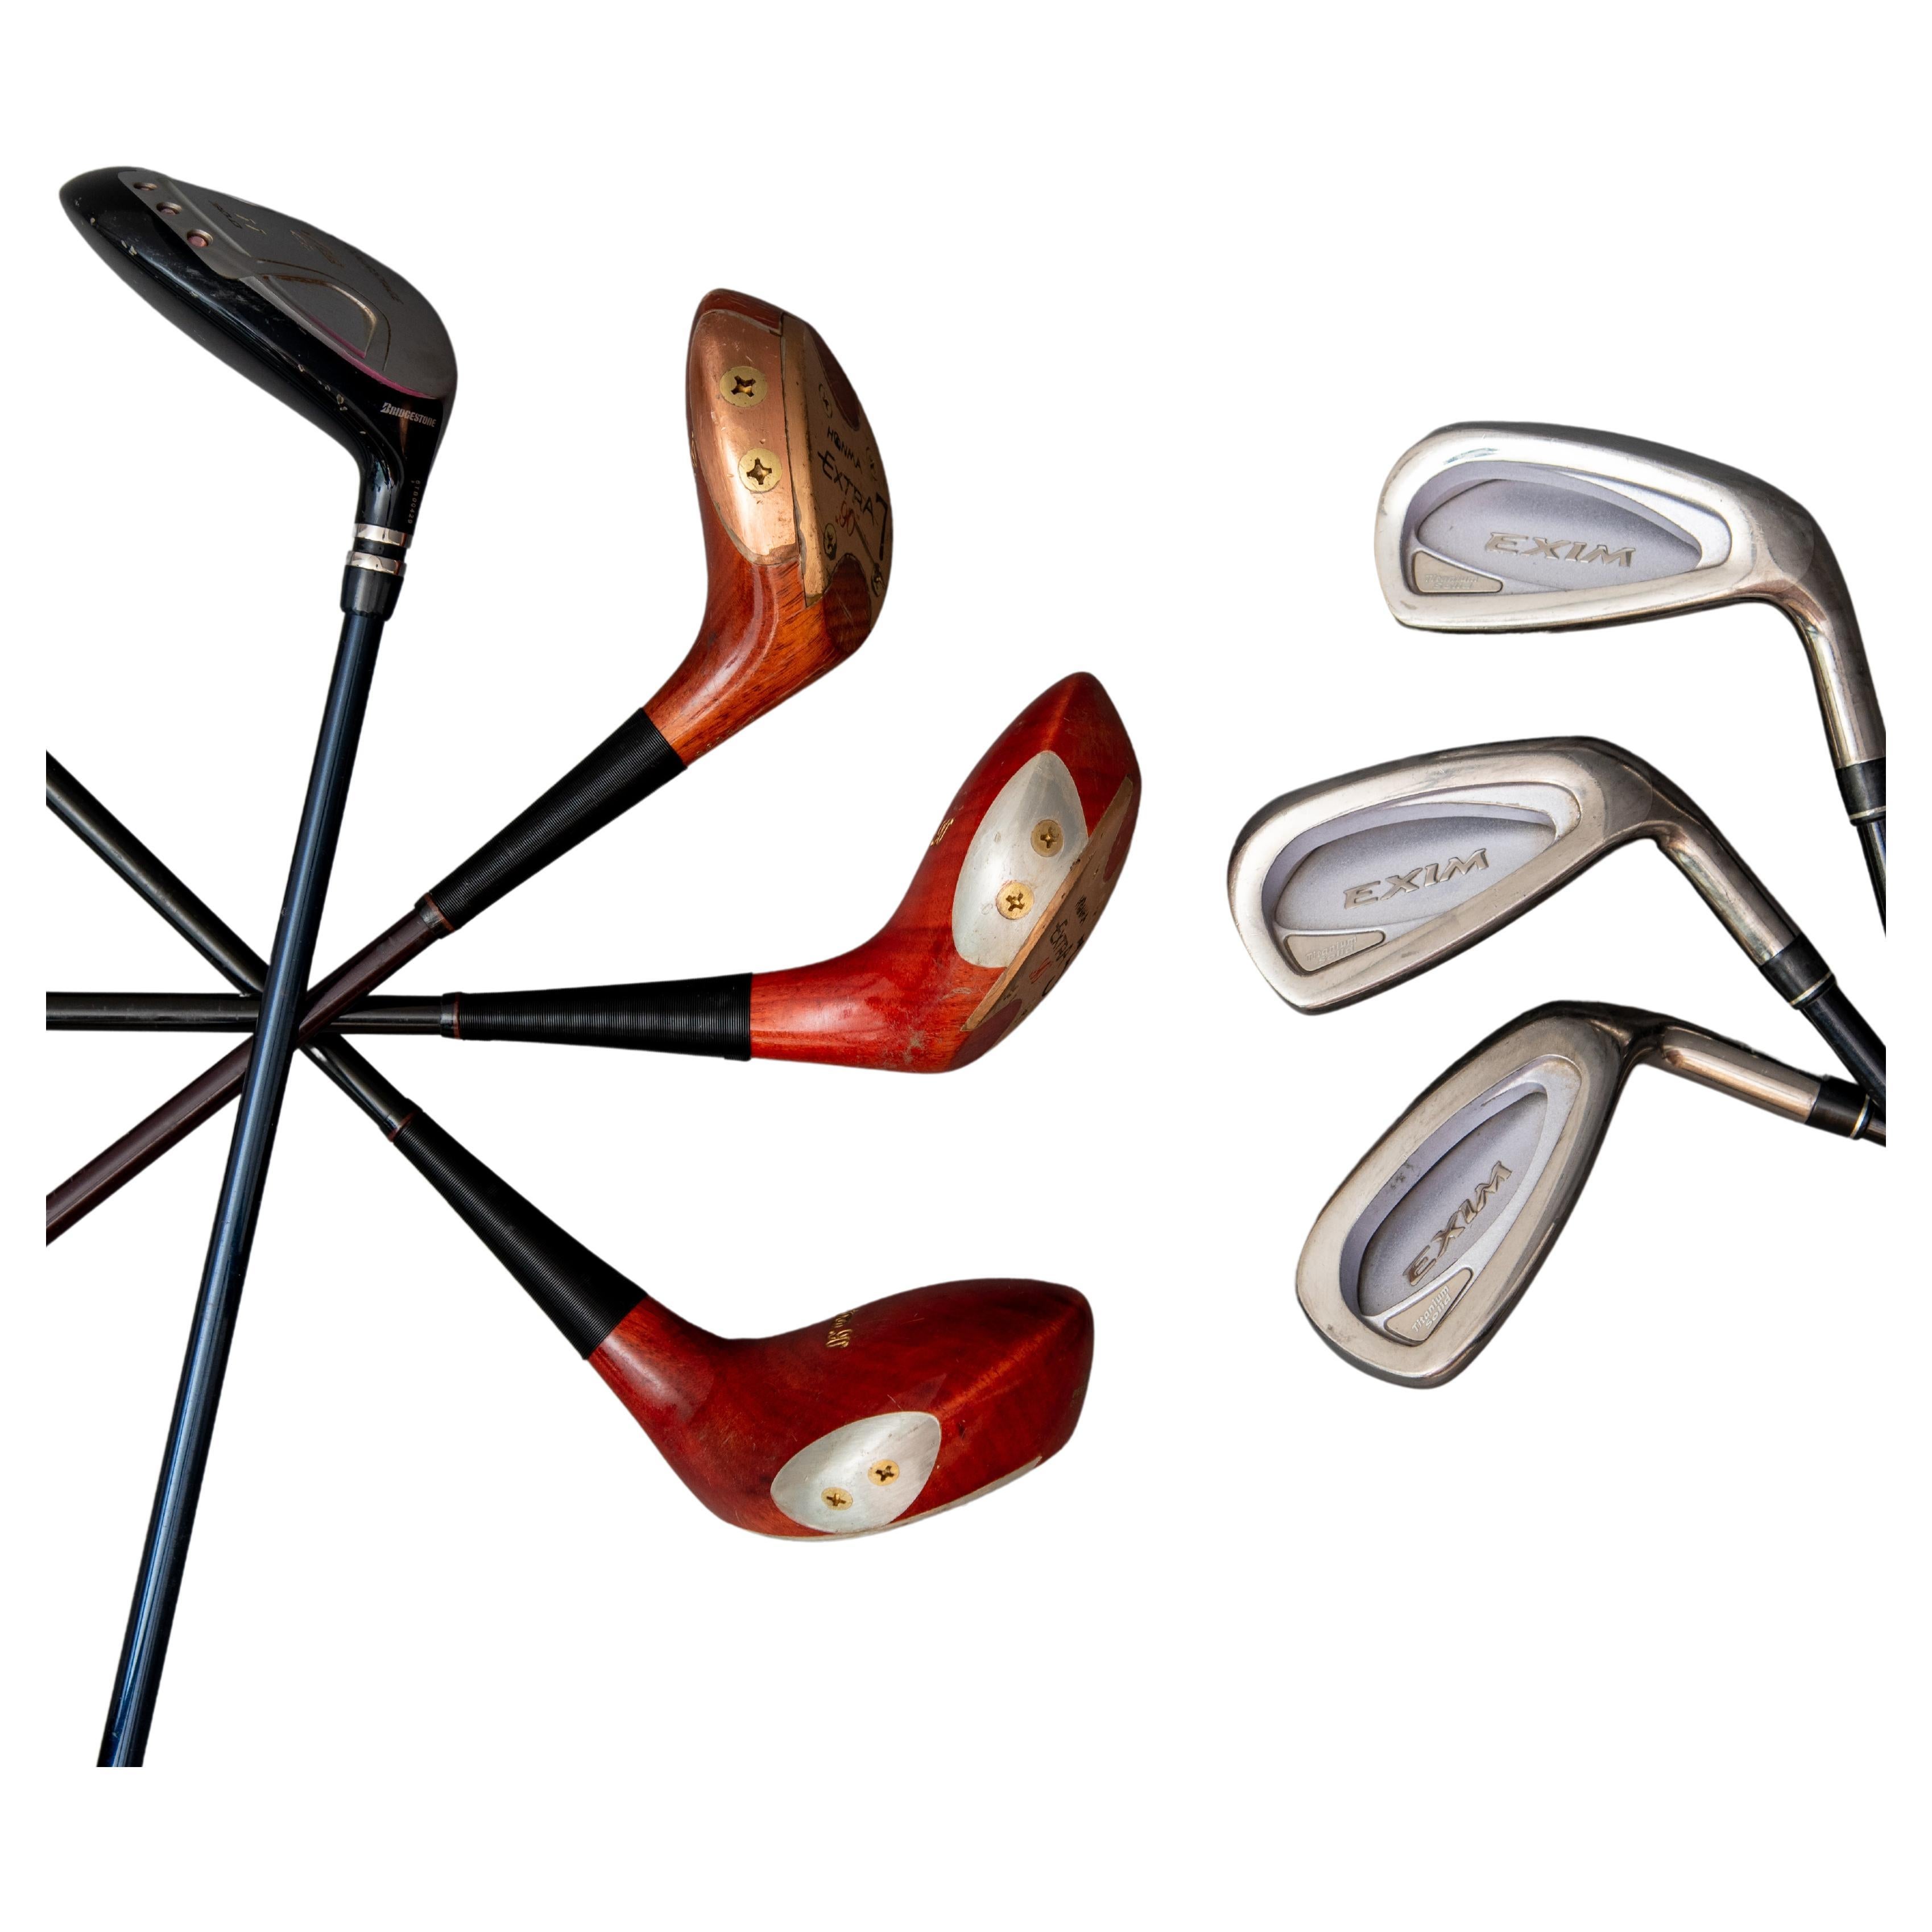 Vintage Golf Clubs with Bags  Vintage golf clubs, Golf bags, Golf